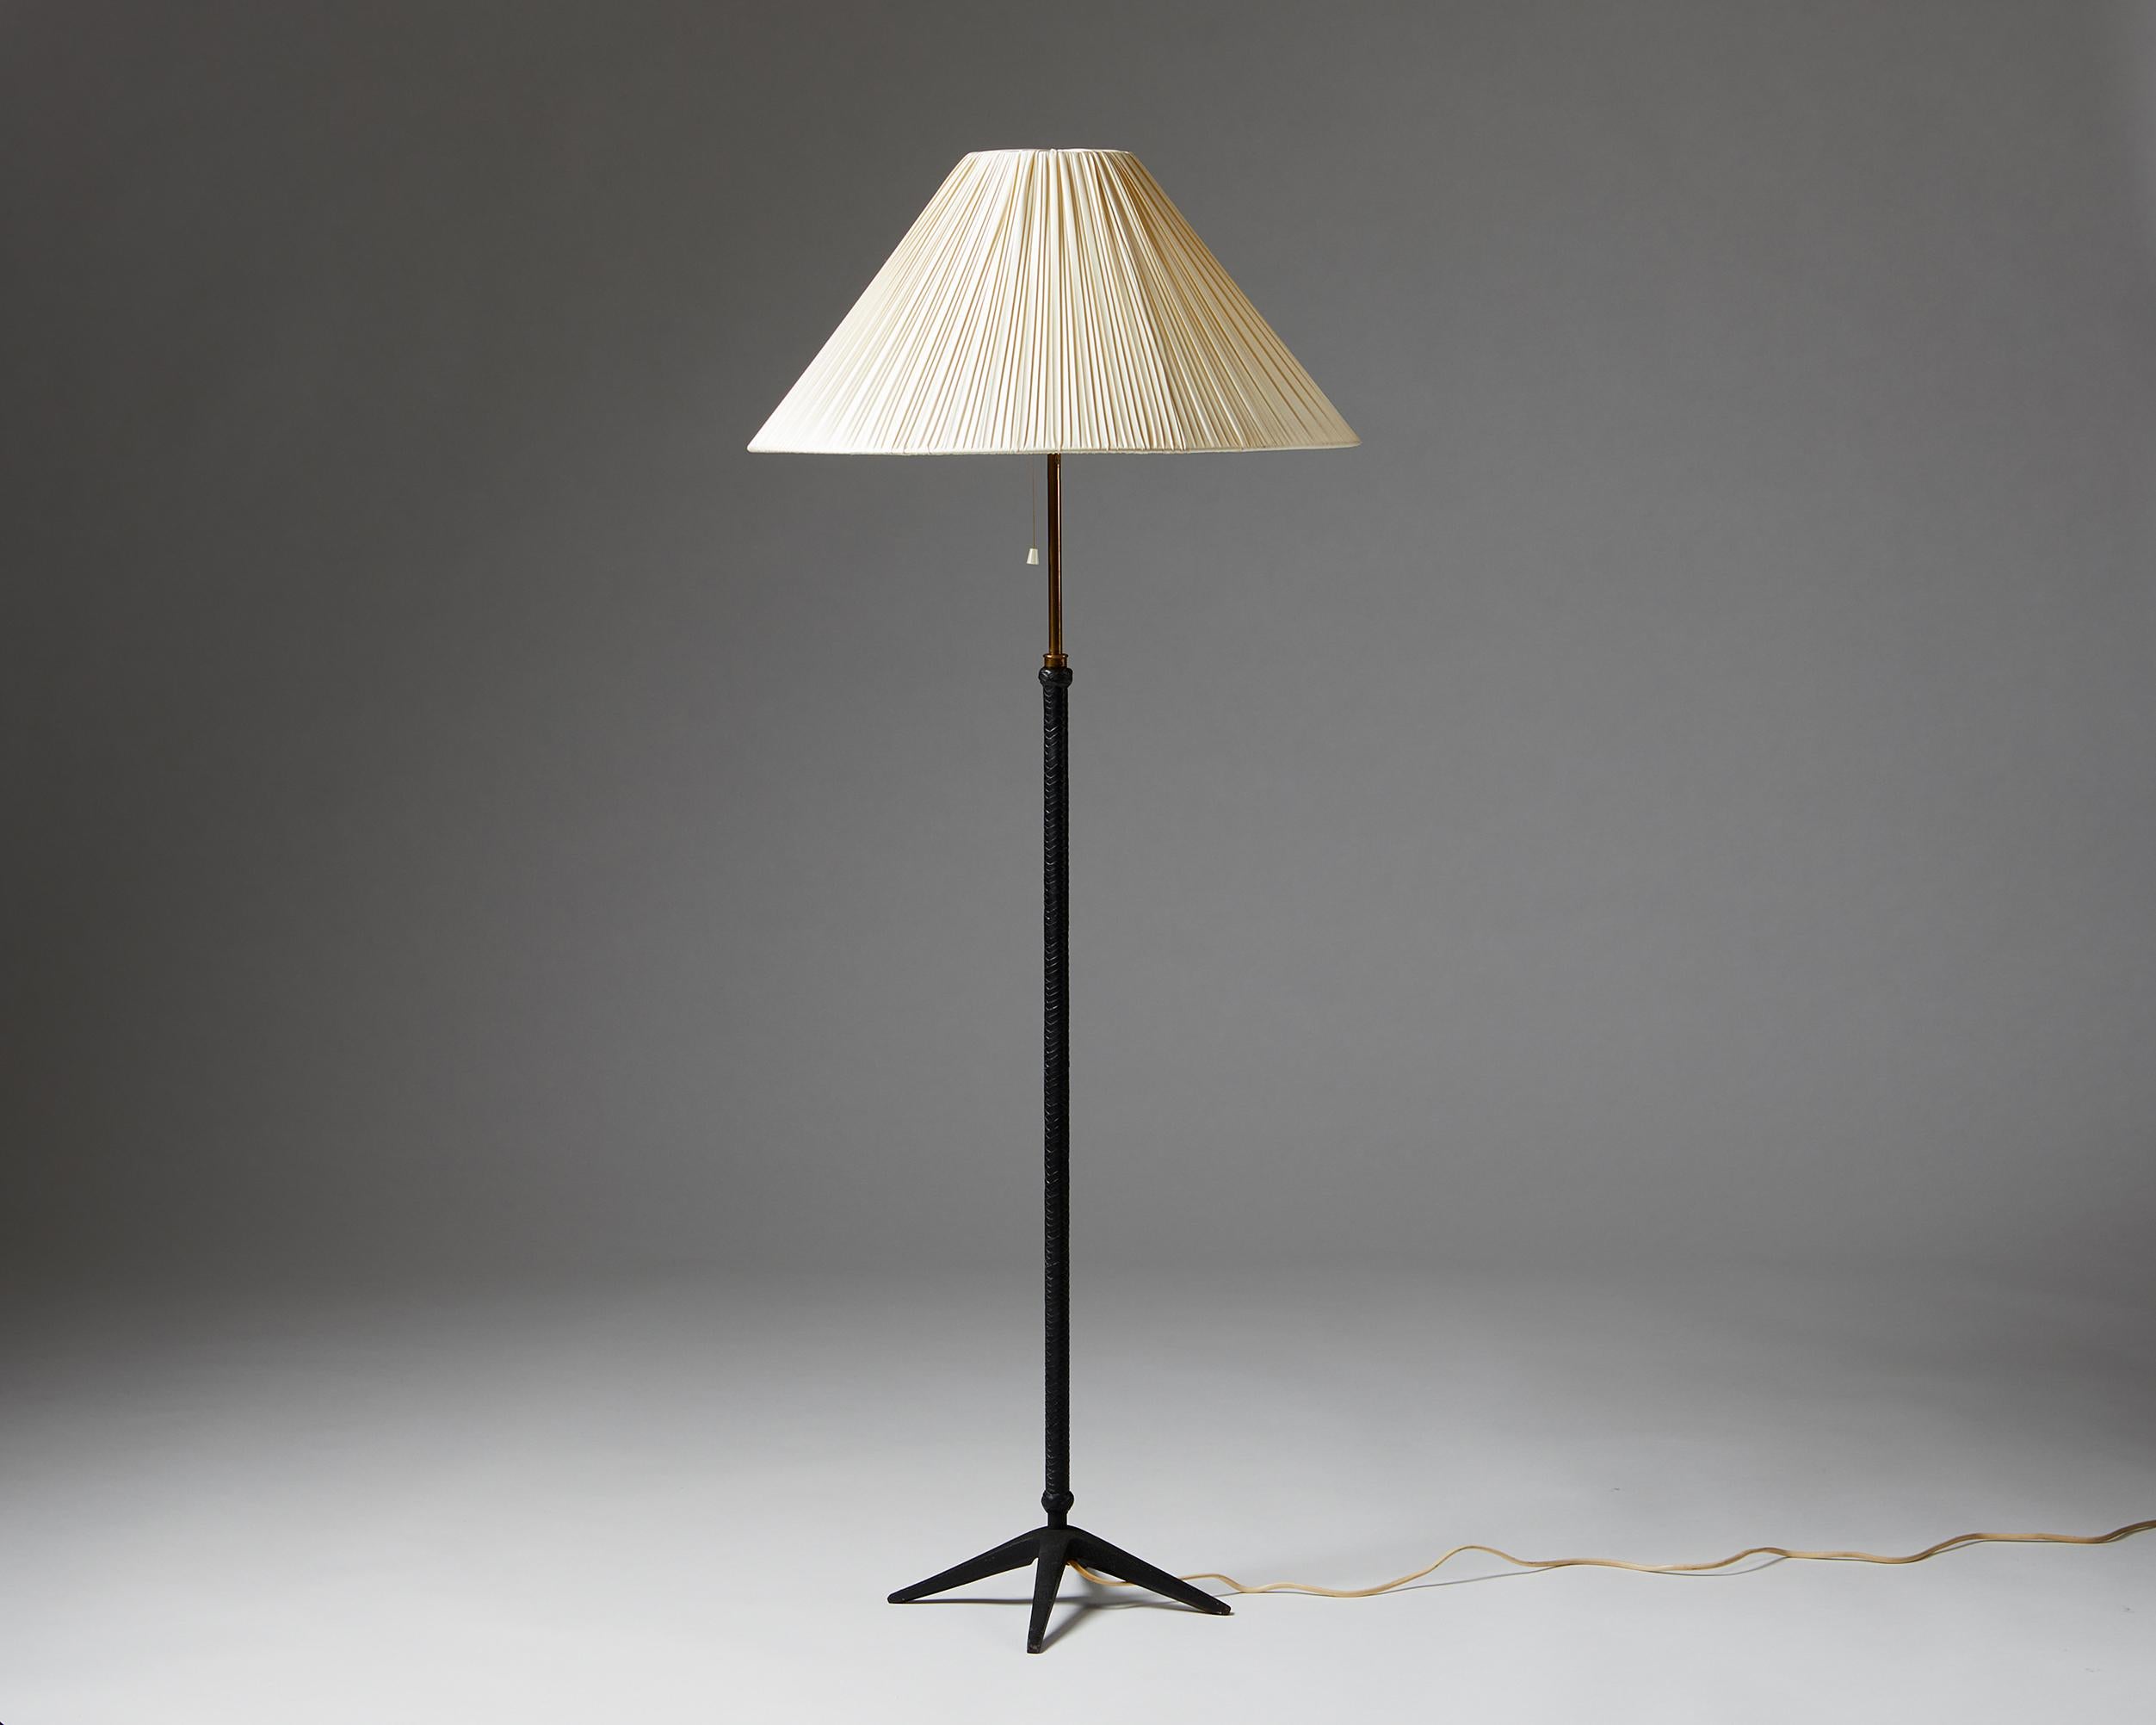 Brass and cast metal, with black leather wrapped stem. Pleated linen shade.

Marked with Böhlmarks oil lamp, and number “15621”.

Measures: D 60.5 cm/ 2'
H 144 cm/ 4' 8 1/2